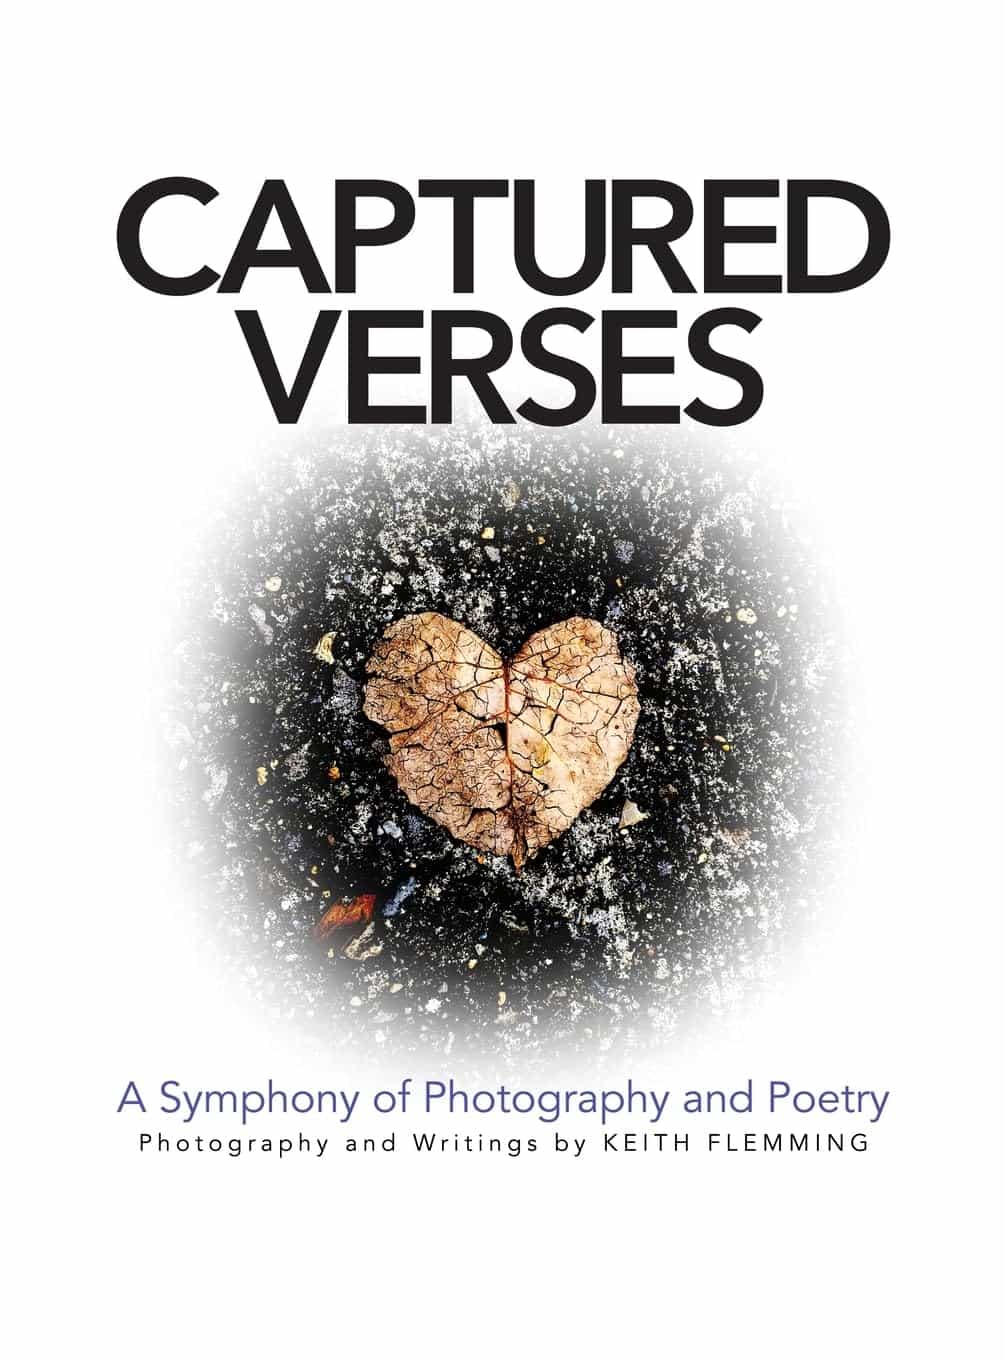 Capturing the Beauty Within: "Captured Verses" - A Symphony of Photography and Poetry by Keith Flemming